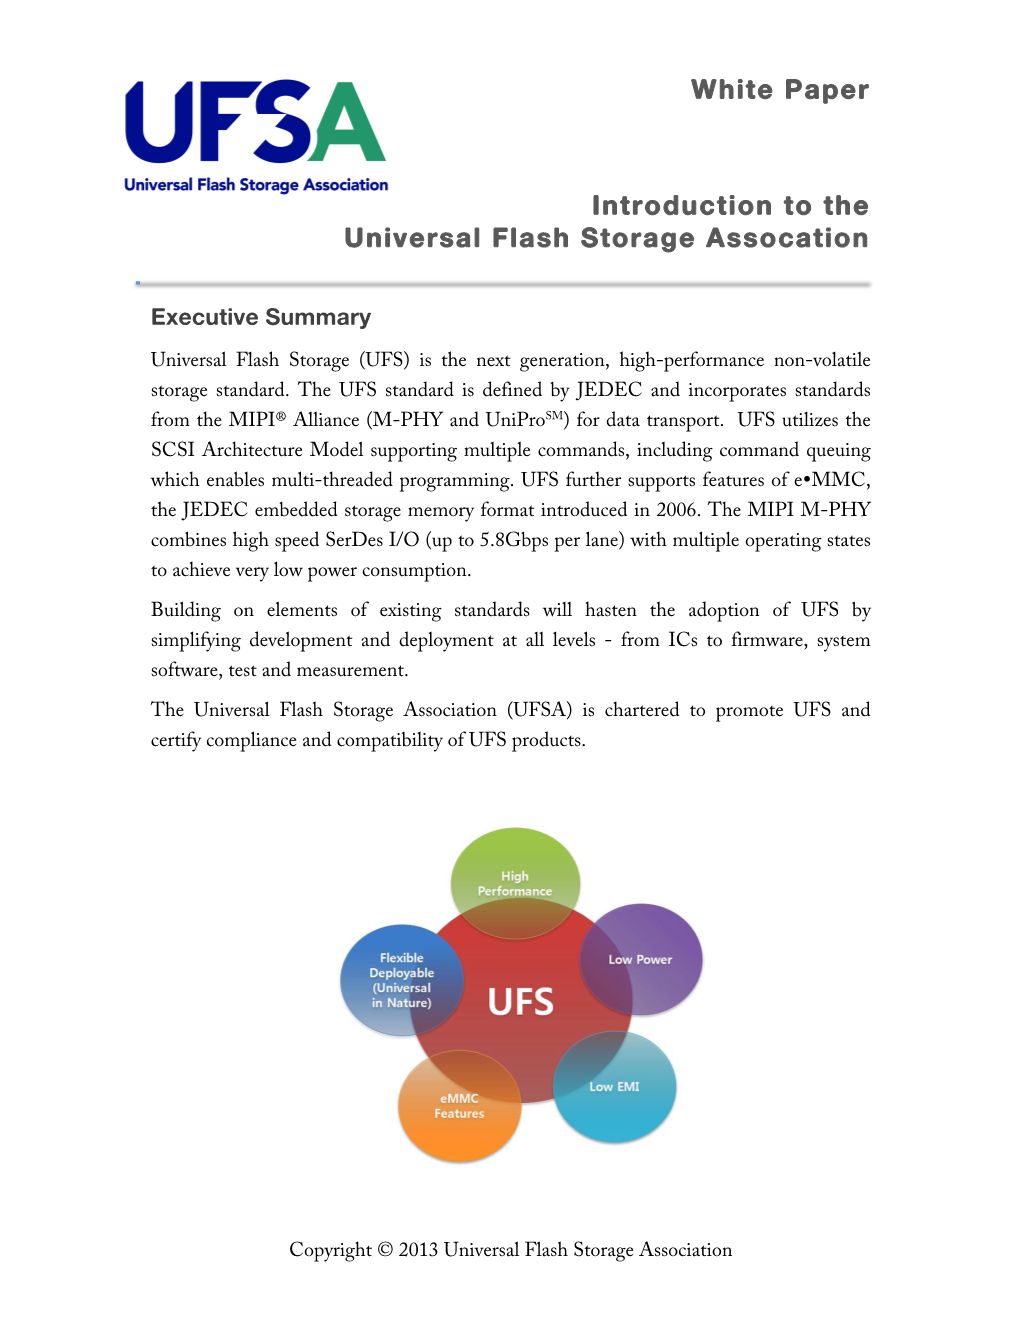 White Paper Introduction to the Universal Flash Storage Assocation